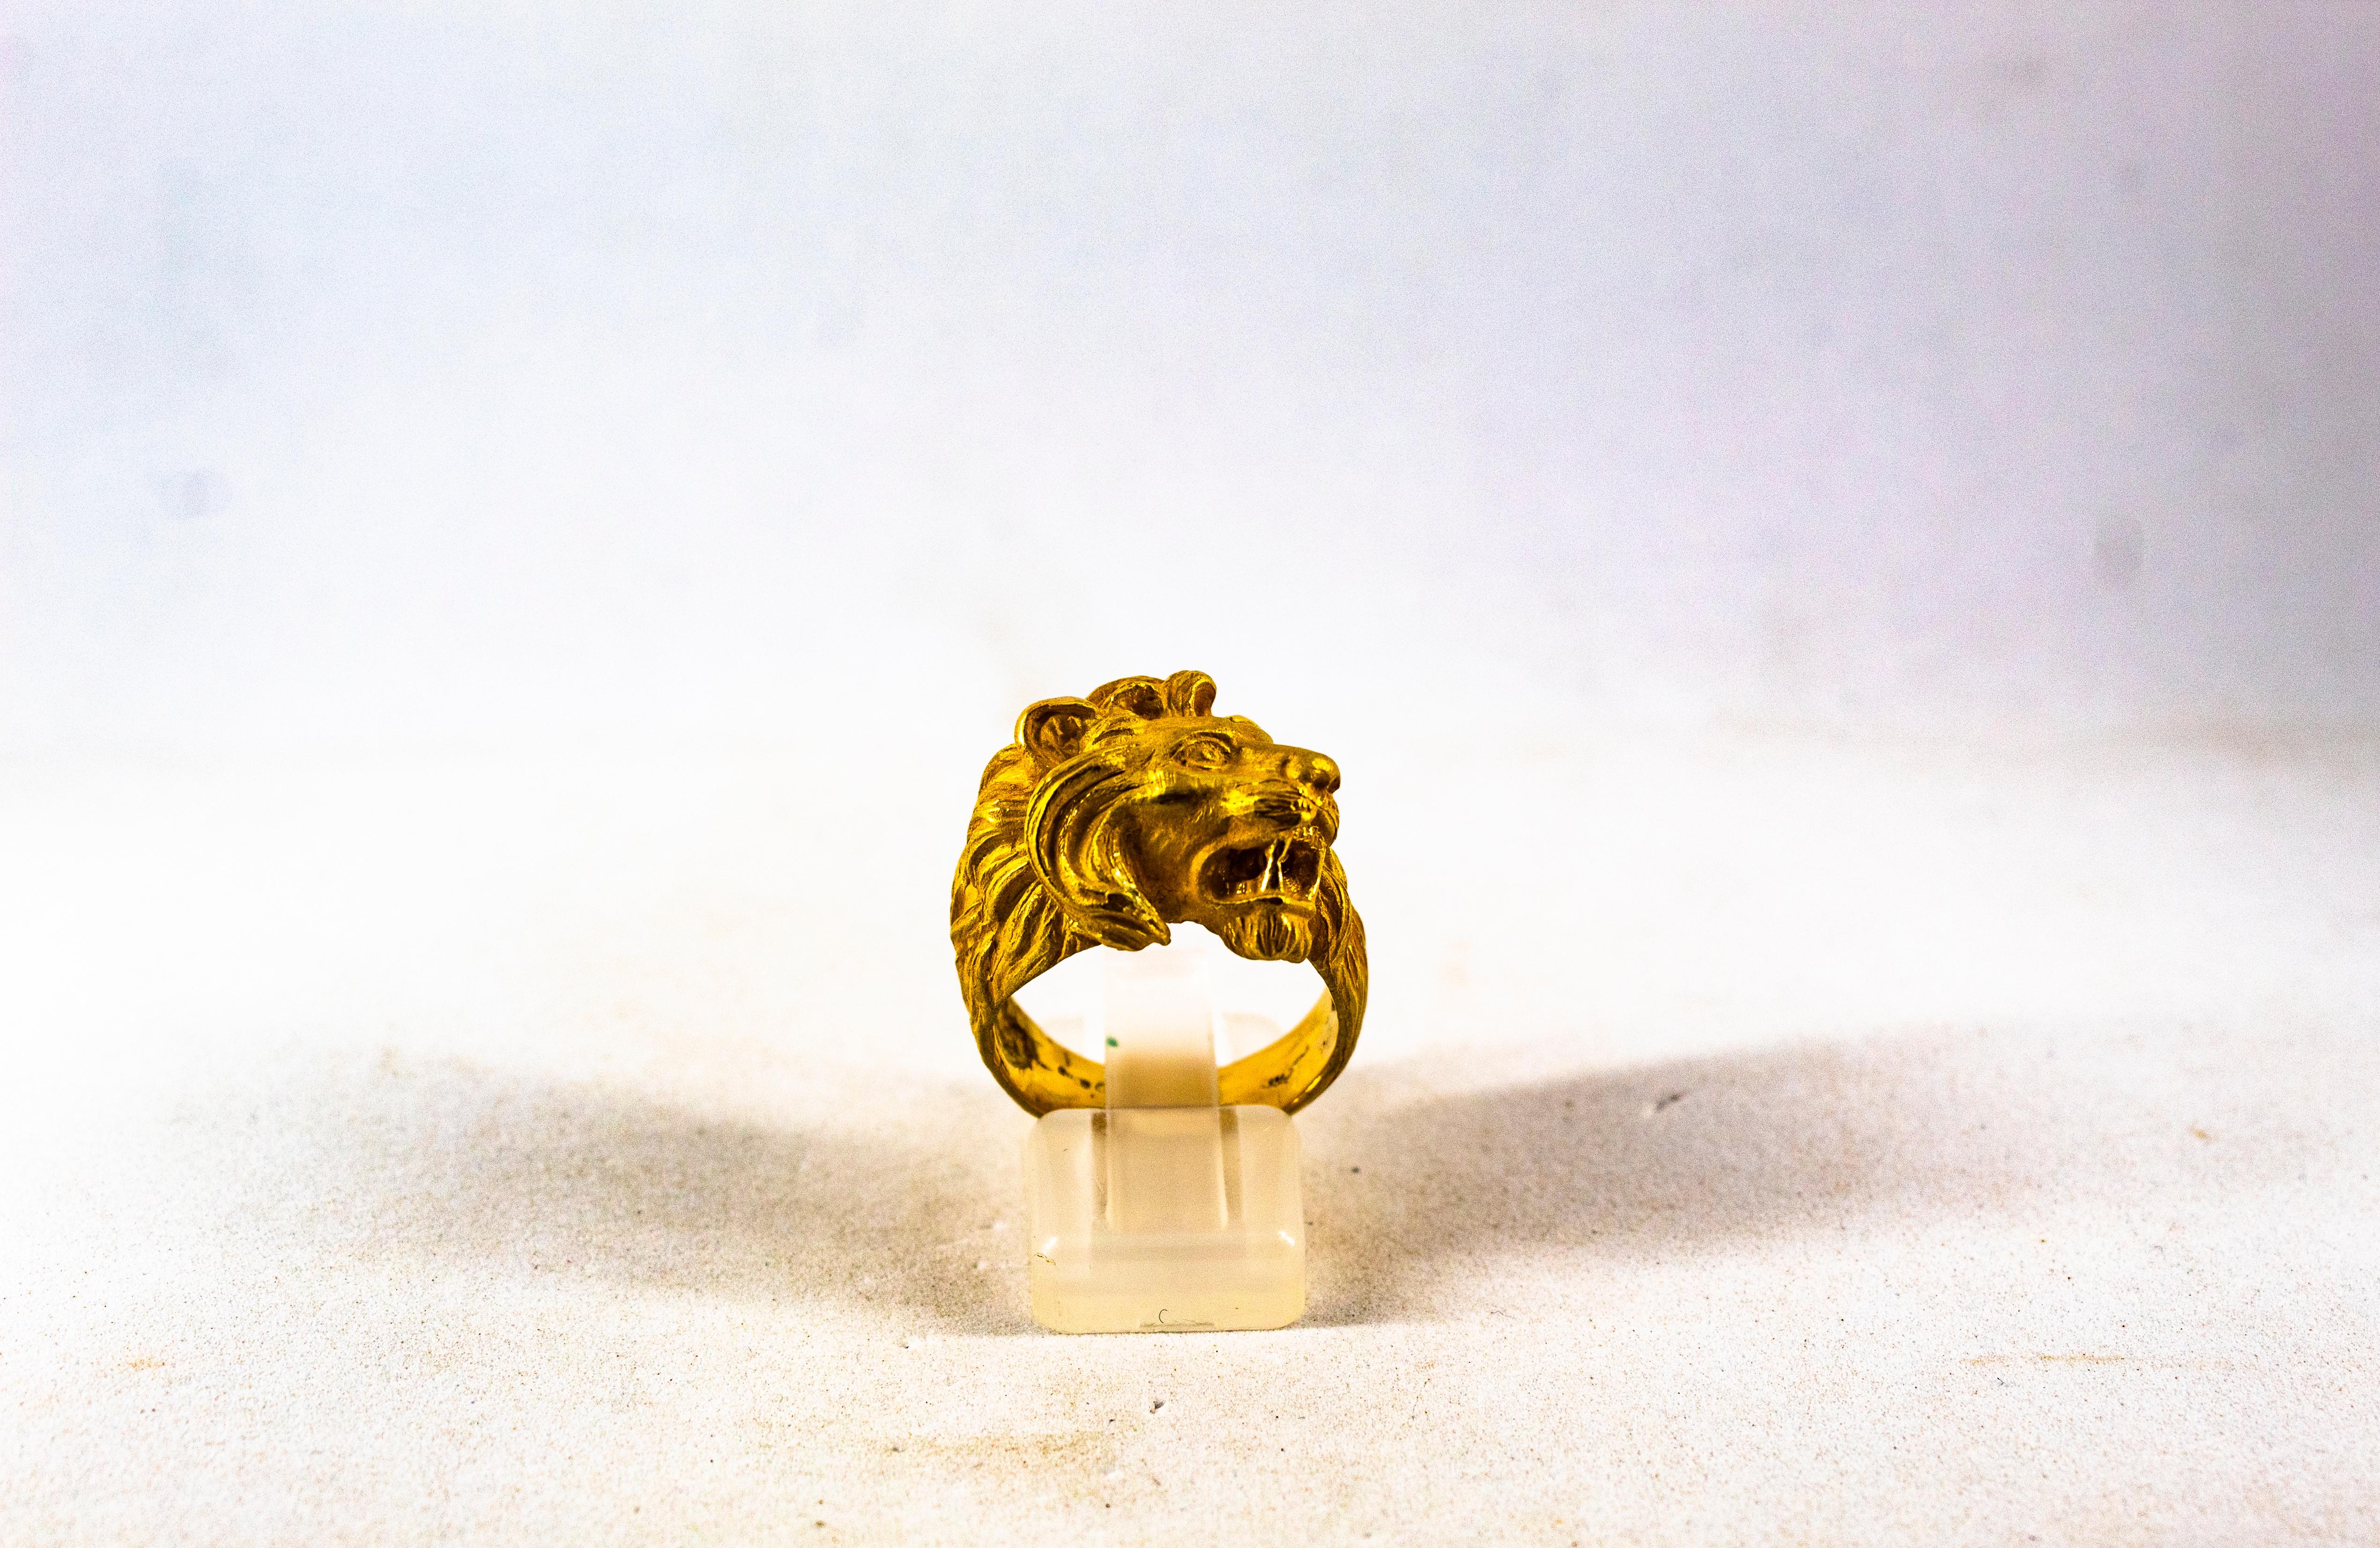 This Ring is made of 18K Yellow Gold.
We can also set two White Diamonds or Rubies in the eyes.
We can also make it in White Gold.
Size ITA: 17 USA: 8

We're a workshop so every piece is handmade, customizable and resizable.